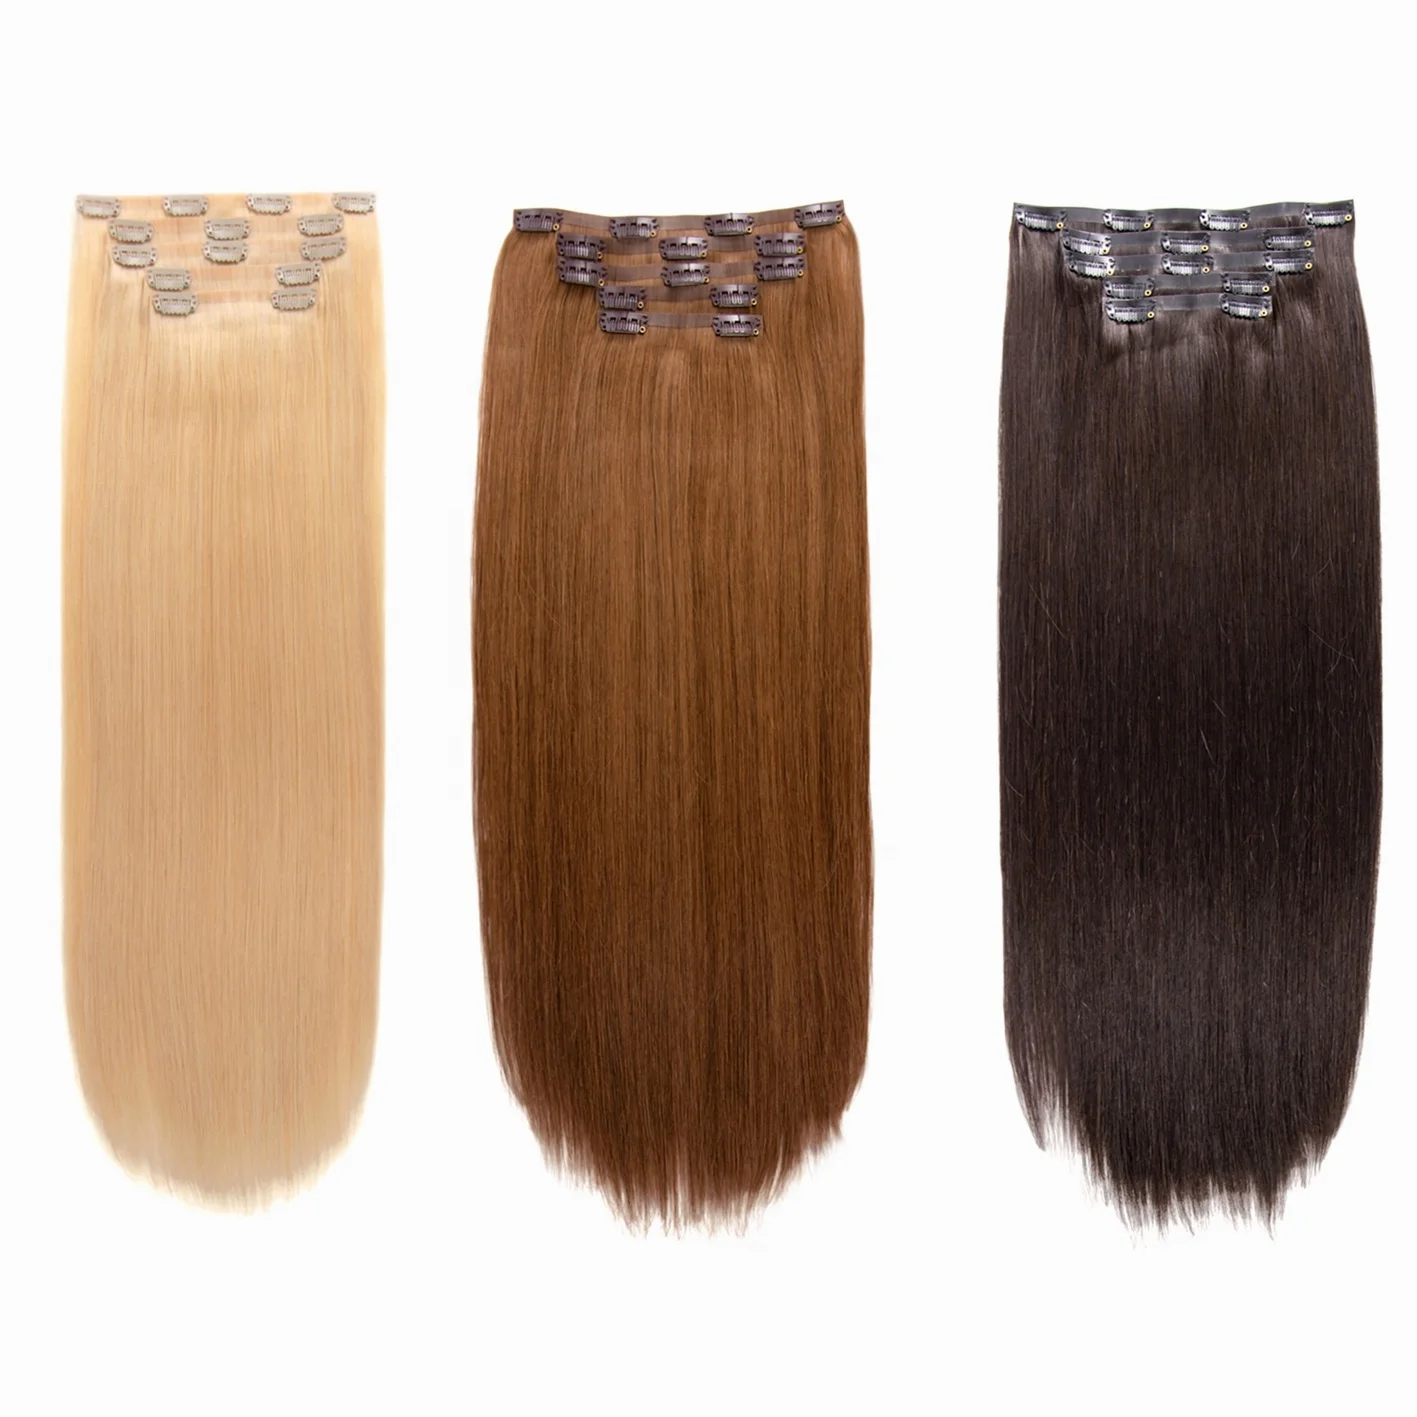 Wholesale Europen Russian Clip In Human Hair Extensions Virgin Remy Seamless Clip In Hair Extensions